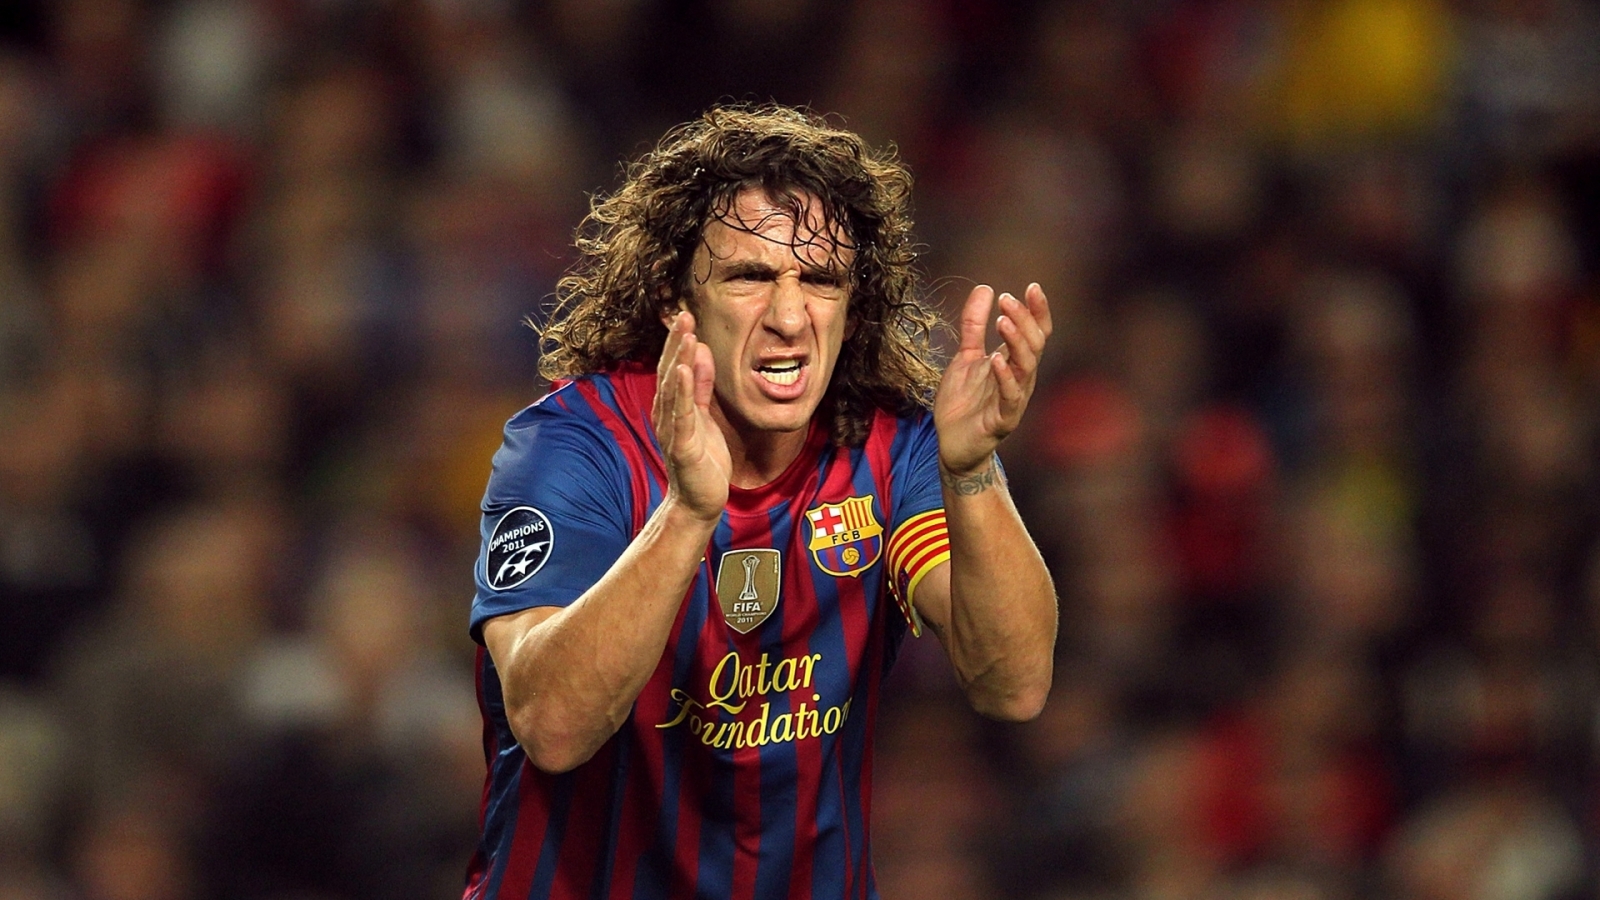 Carles Puyol Urging for 1600 x 900 HDTV resolution